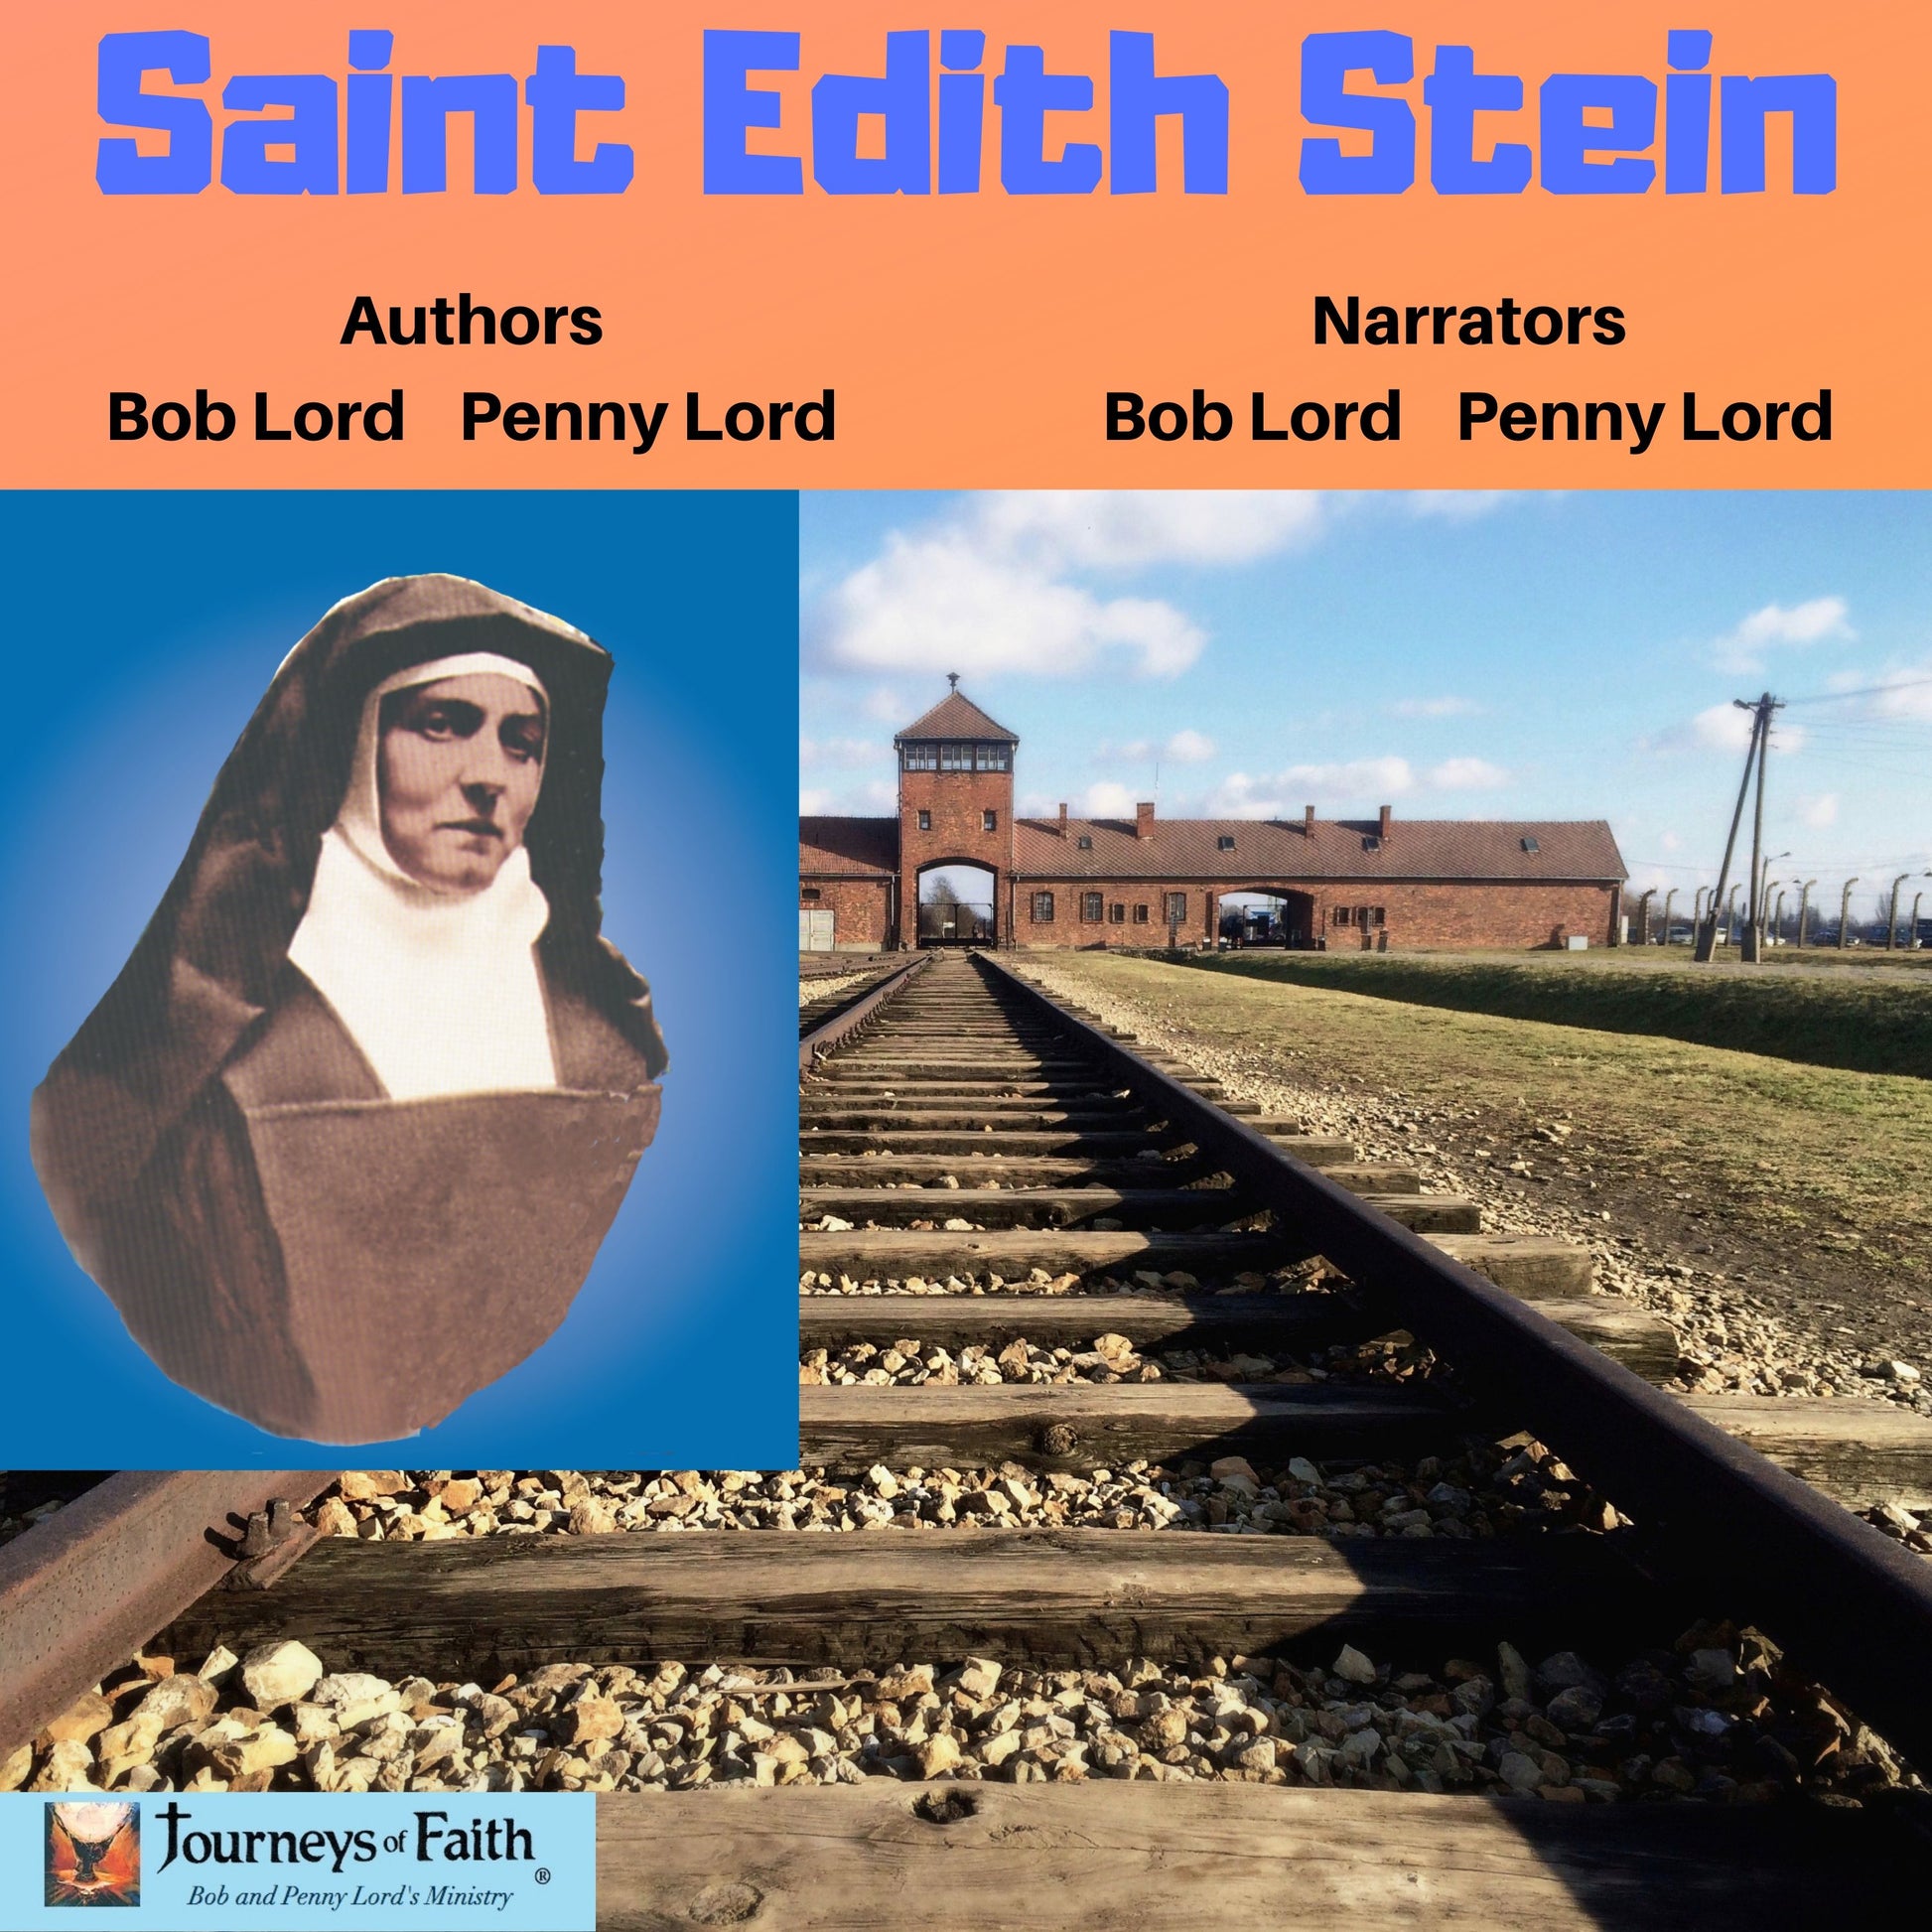 Saint Edith Stein Audiobook - Bob and Penny Lord